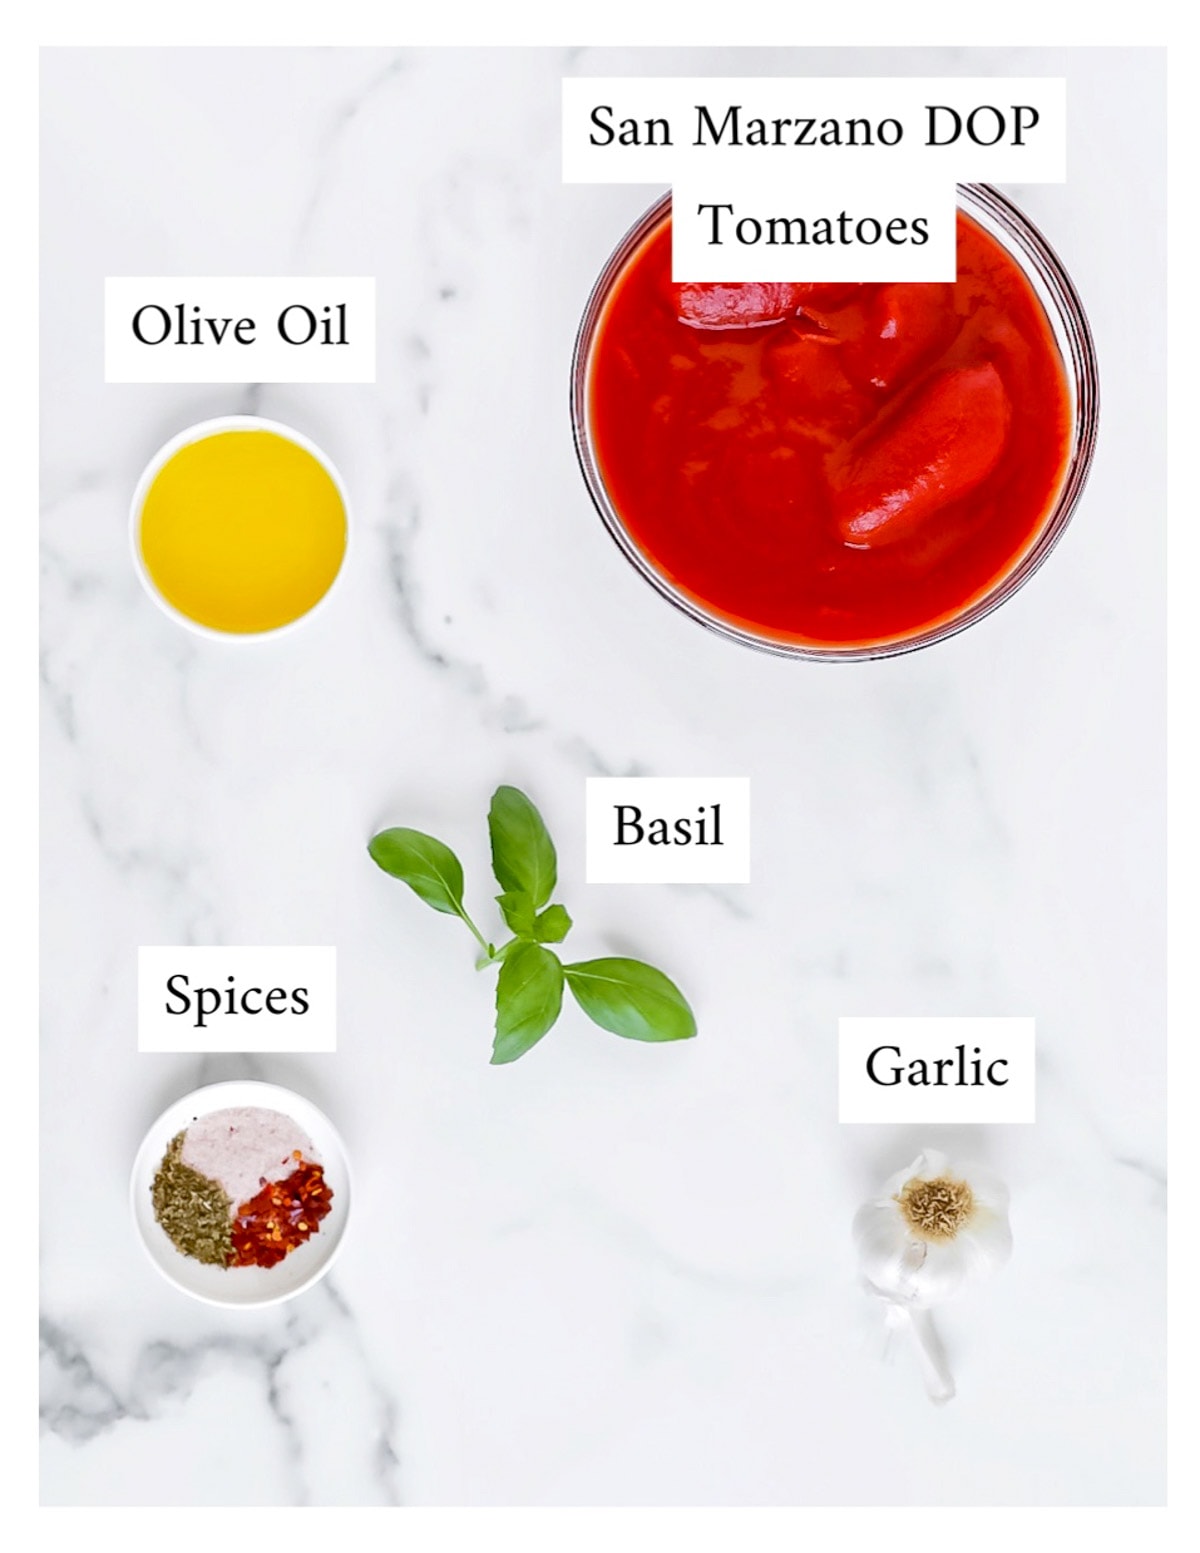 Labeled ingredients including: san marzano DOP tomatoes, olive oil, basil, spices, and garlic